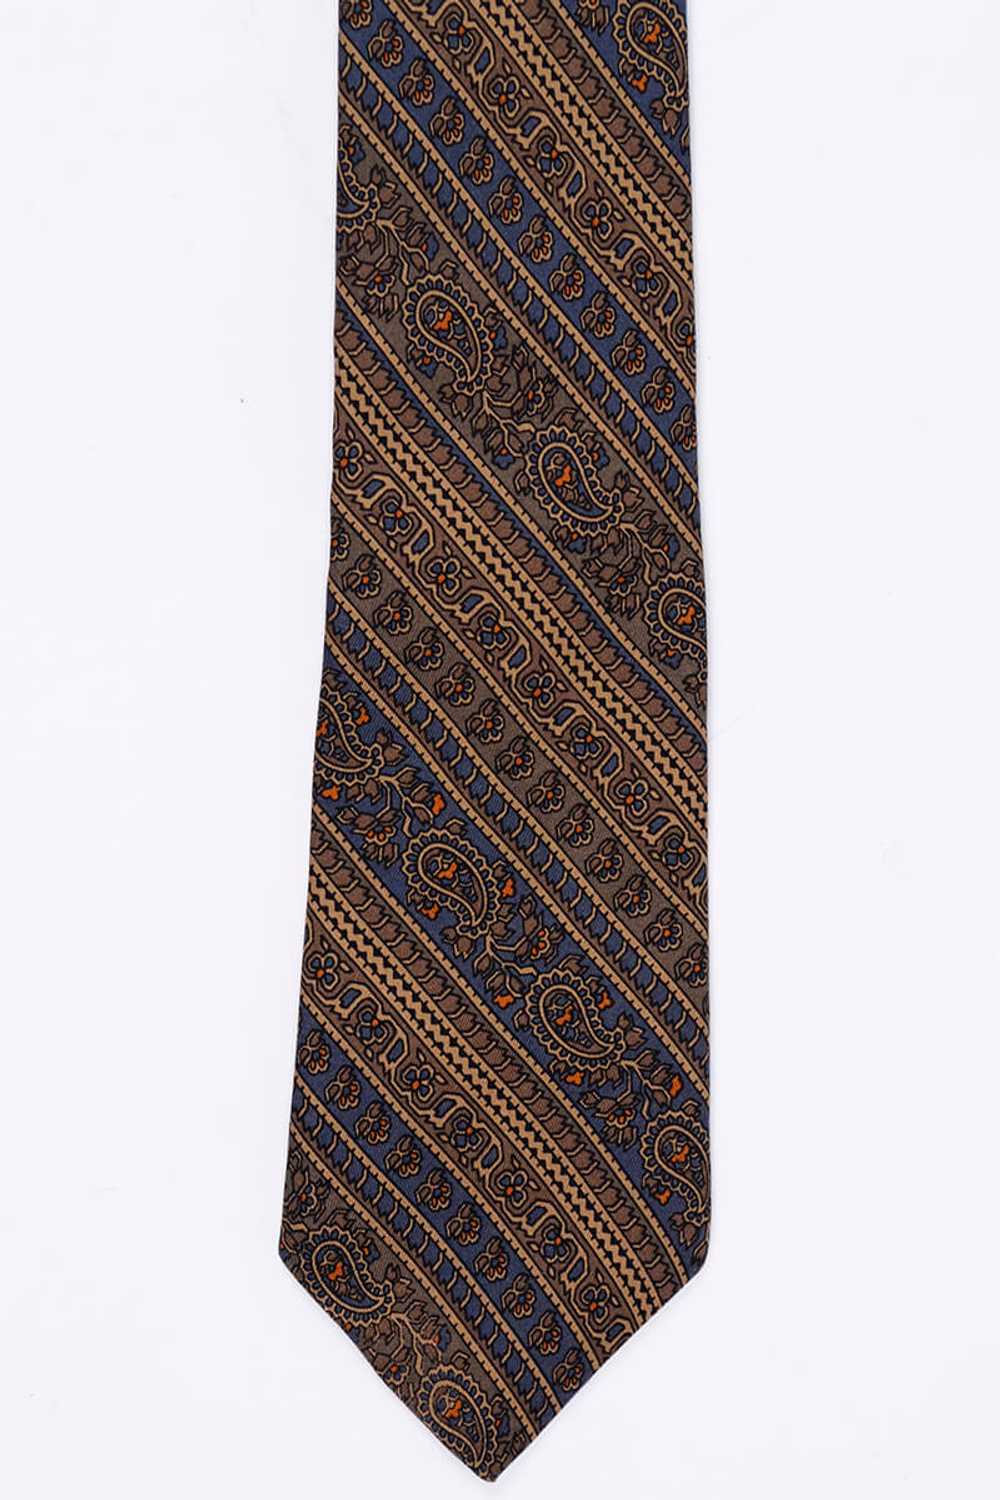 1950s Liberty of London Brown & Blue Paisley Narr… - image 4